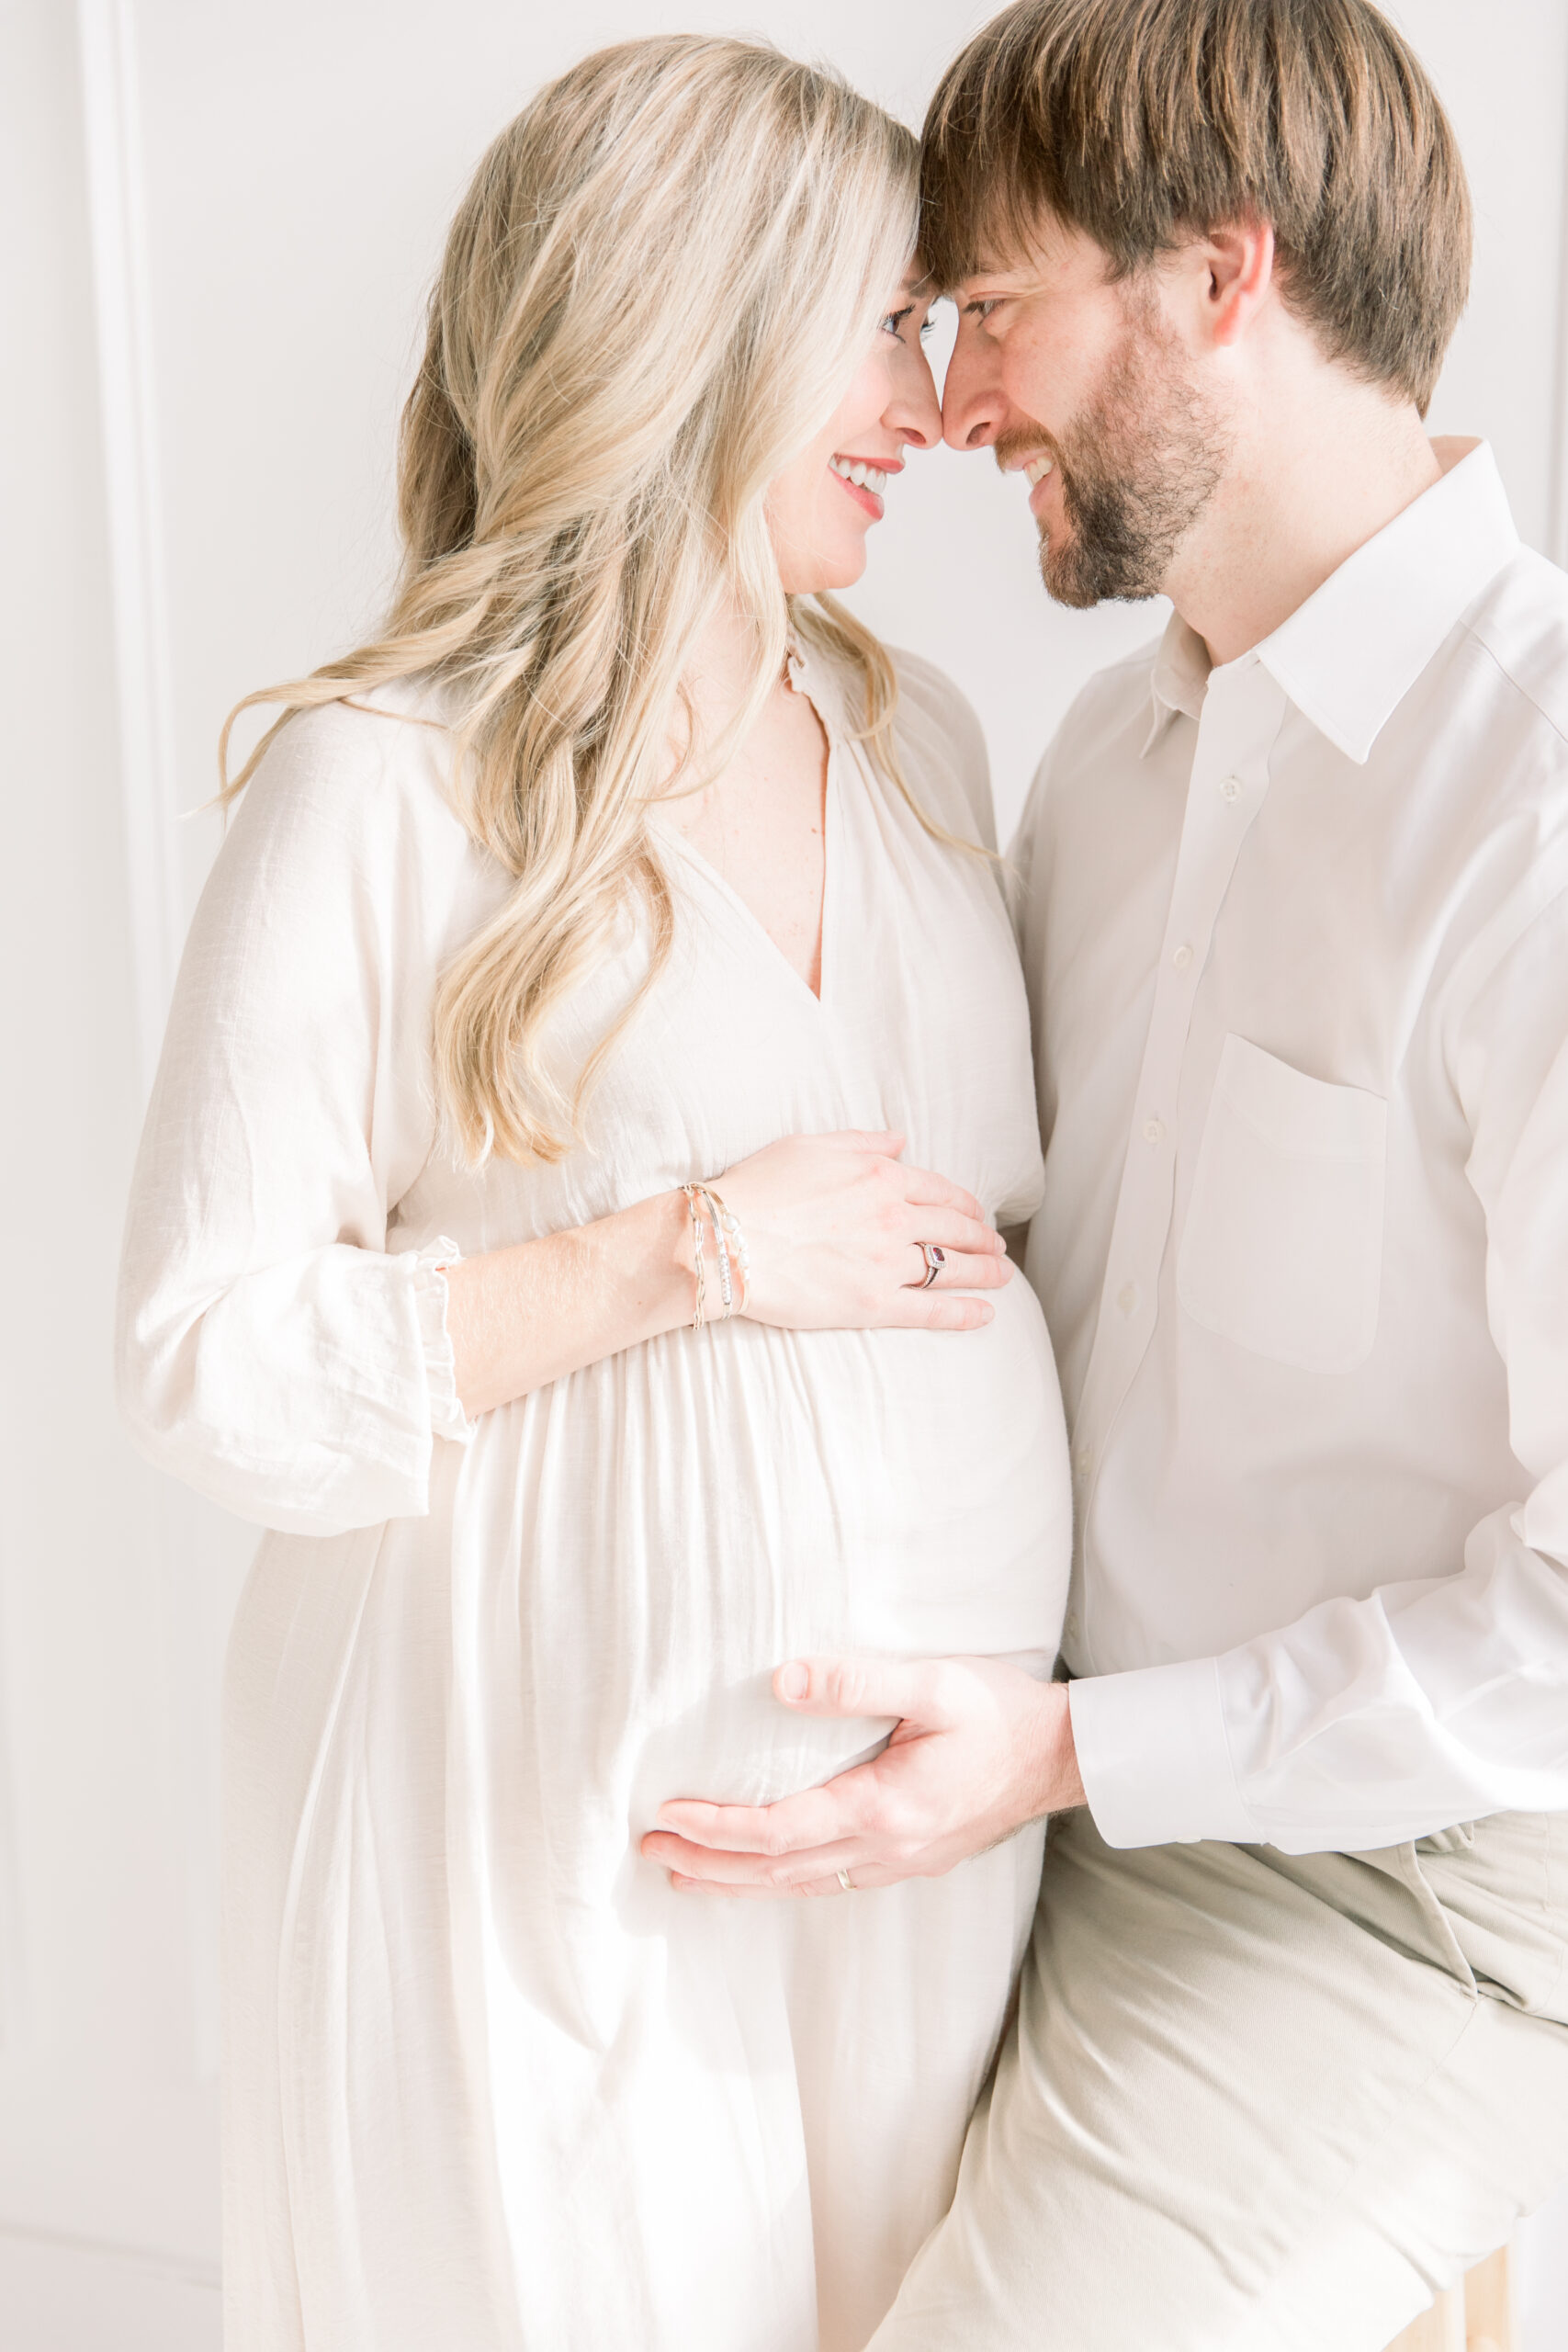 Date night ideas when expecting a baby in Charlotte NC 